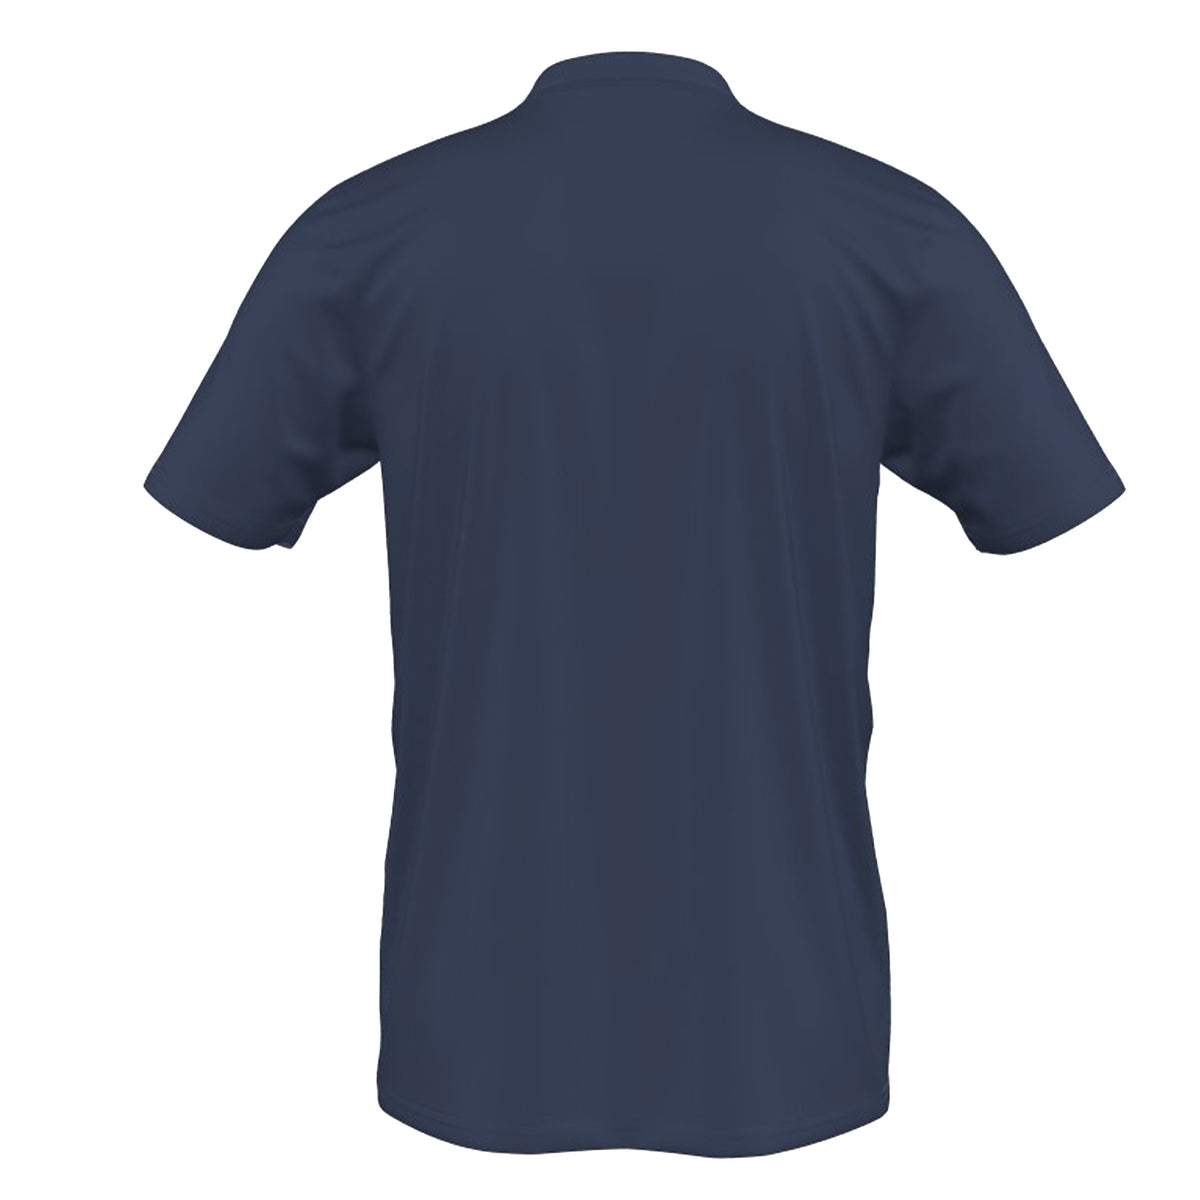 Hampstead and Westminster HC Men's Training Shirt: Navy